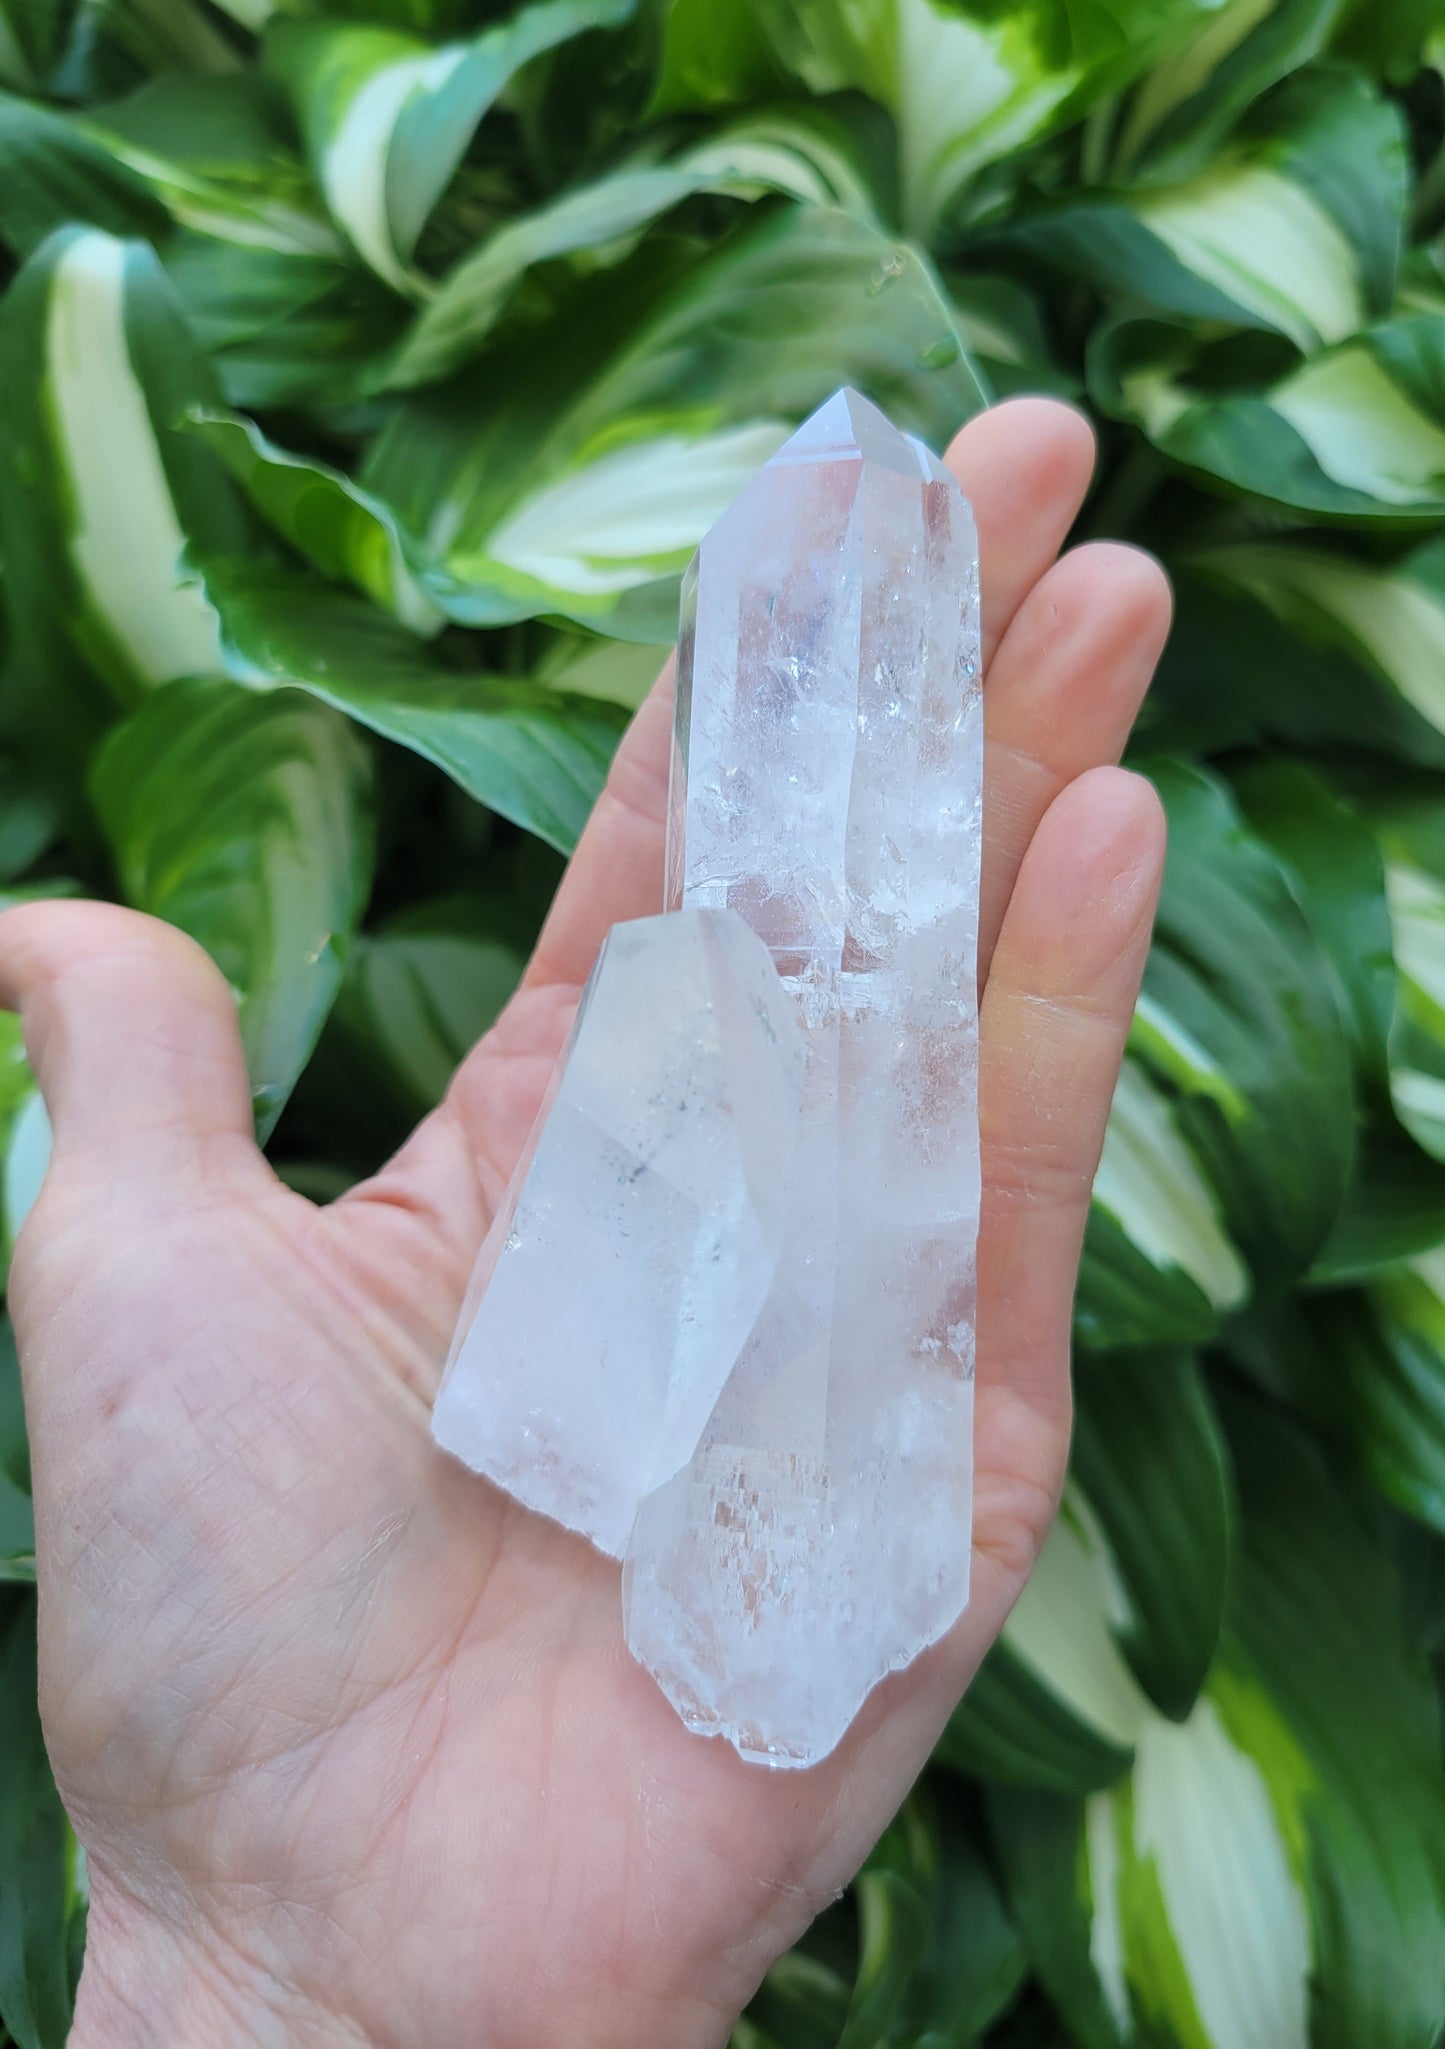 Quartz, Tantric Twin and Self Healed Specimen from Colombia (W 1 3/4 X D 1 1/2 X L 4 1/2 inches)